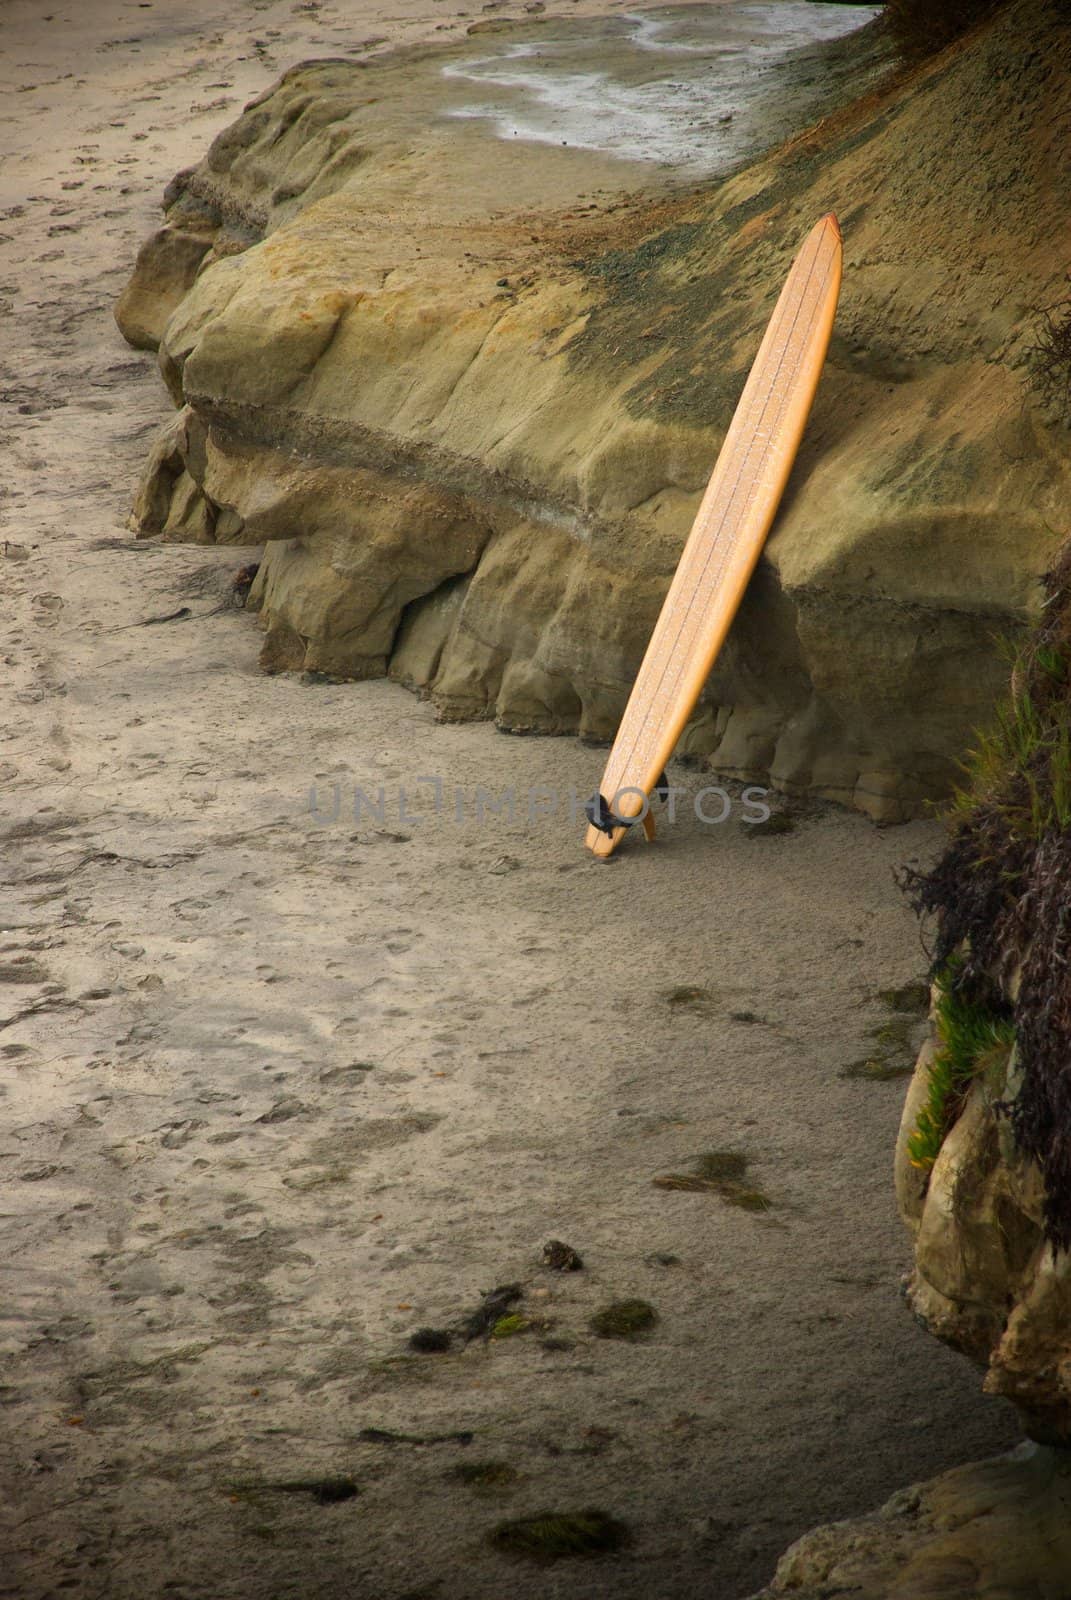 A single surfboard stands against colorful rocks in the stand